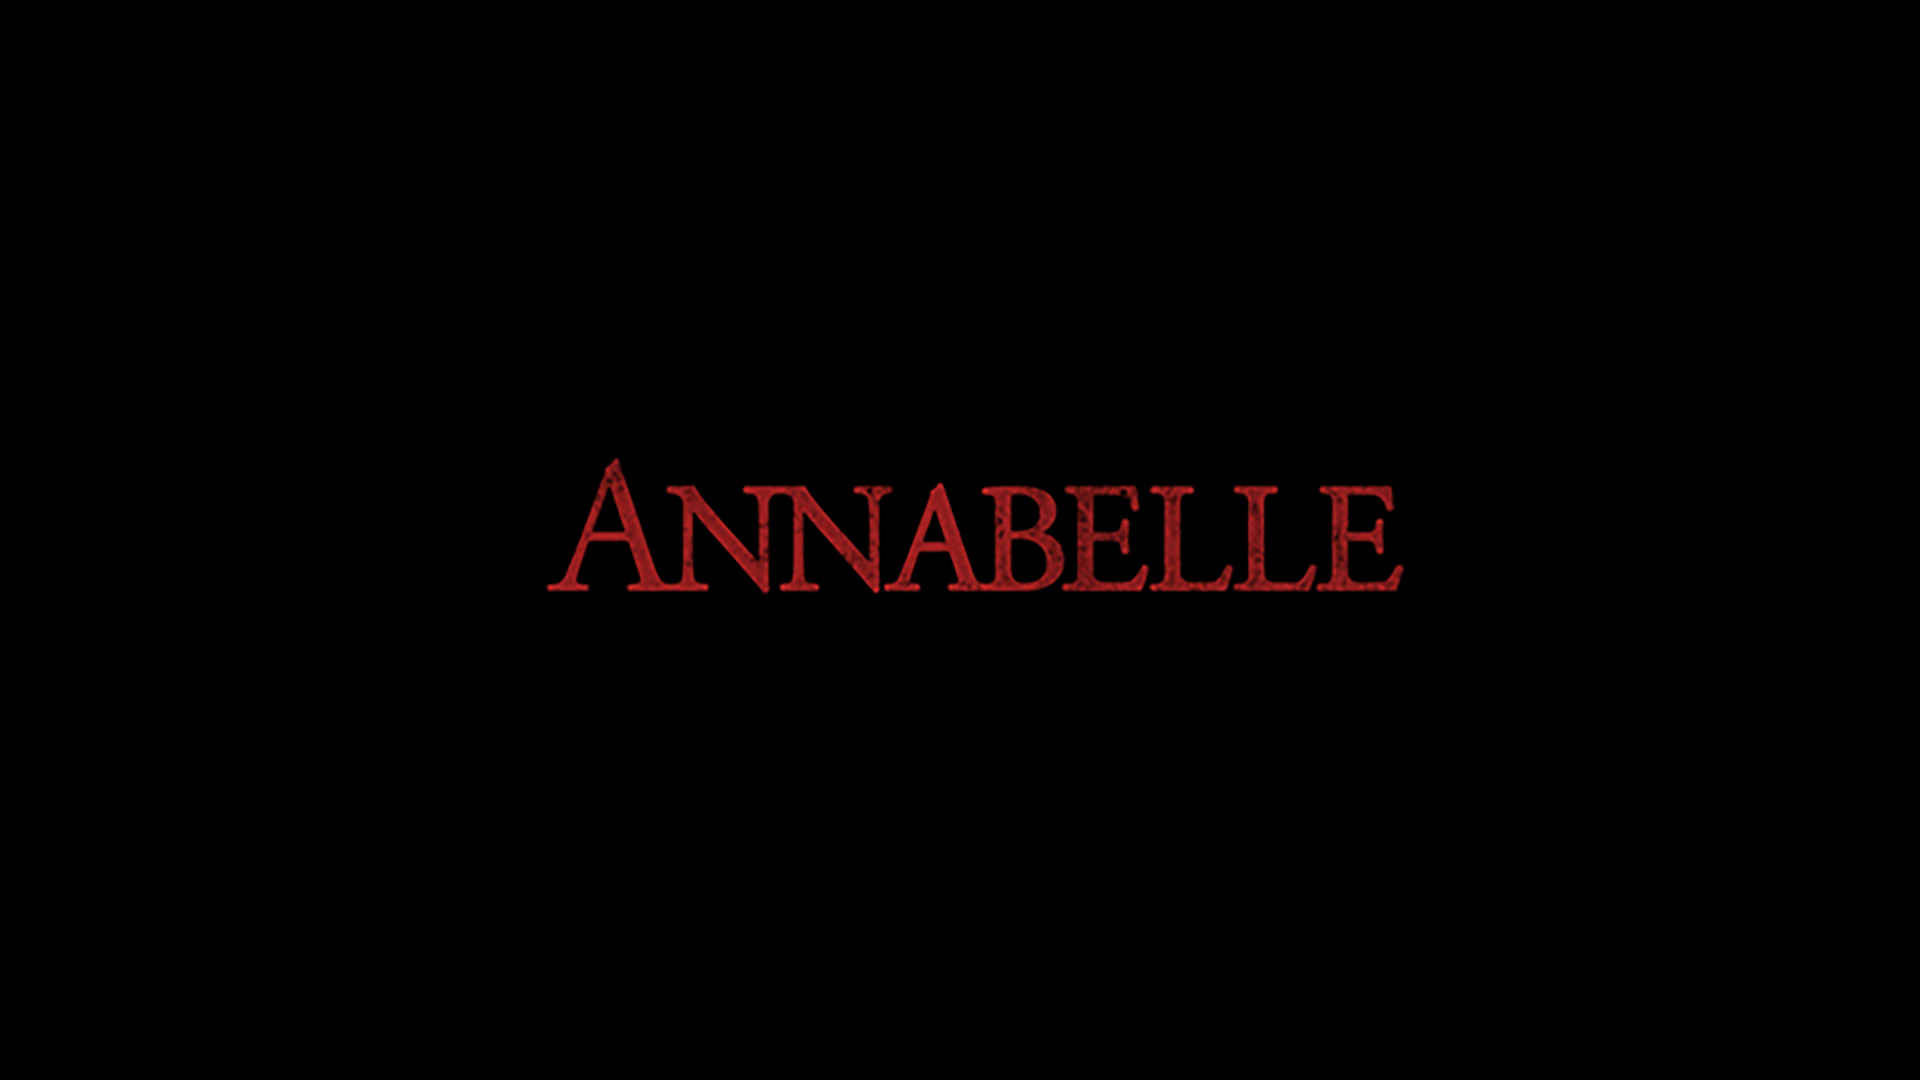 Annabelle Text In Black Background